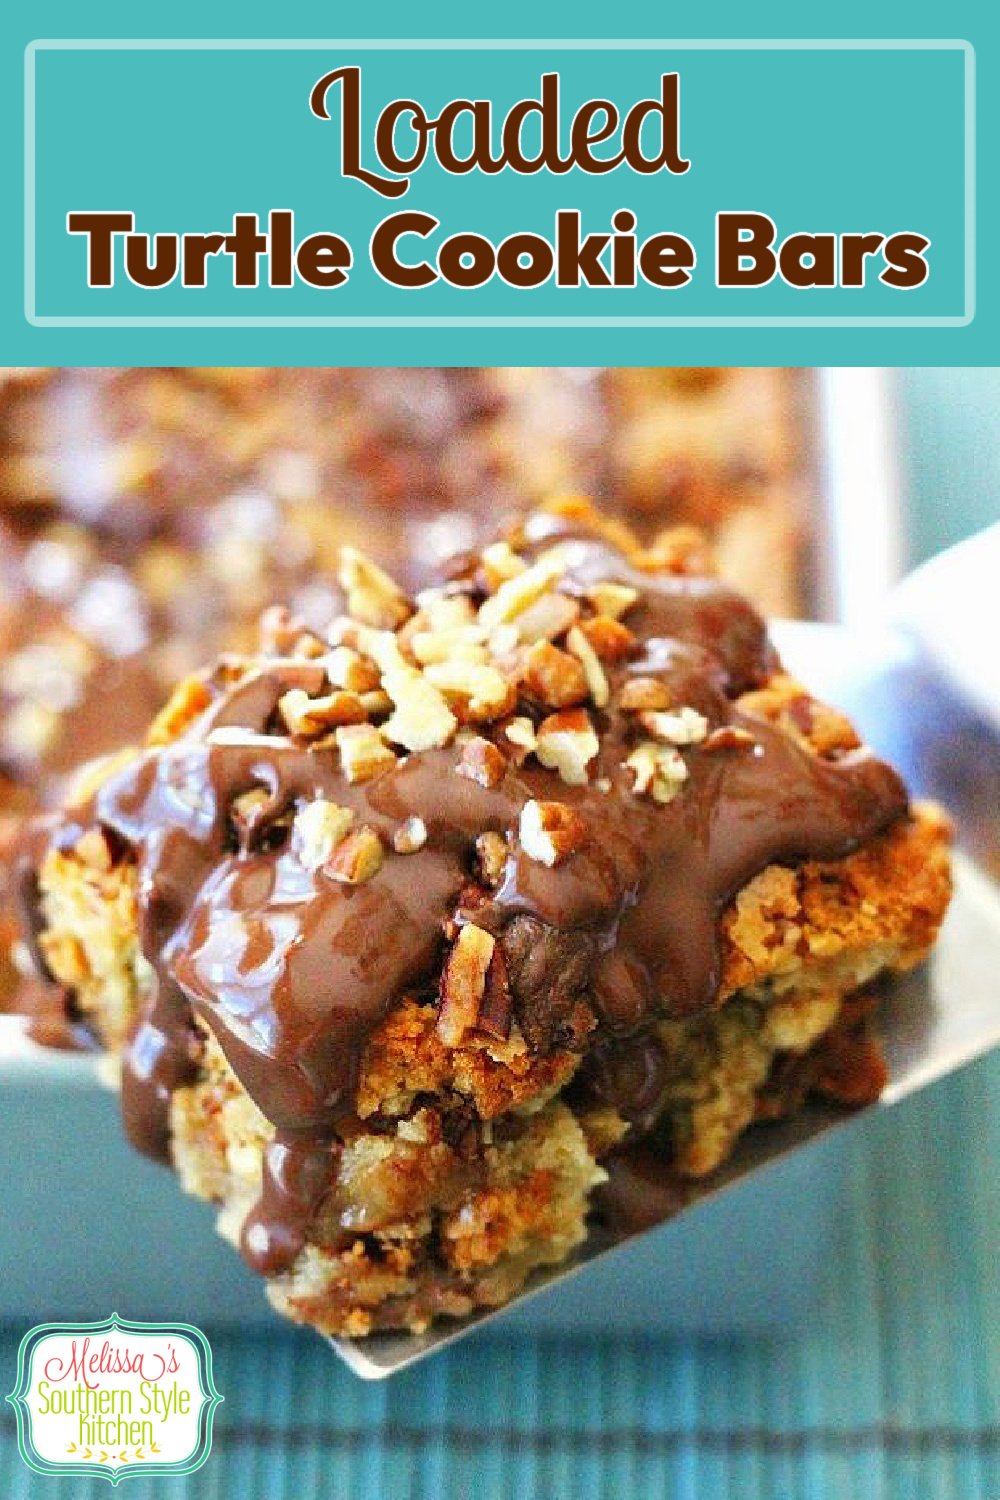 Loaded Turtle Cookie Bars are filled with Rolo candies, chocolate and pecans all wrapped up in a buttery cookie batter. #cookiebars #turtlecookiebars #turtlecandy #desserts #dessertfoodrecipes #sweets #caramel #pecans #southernfood #southernrecipes #cookies #holidaybaking #holidayrecipes via @melissasssk